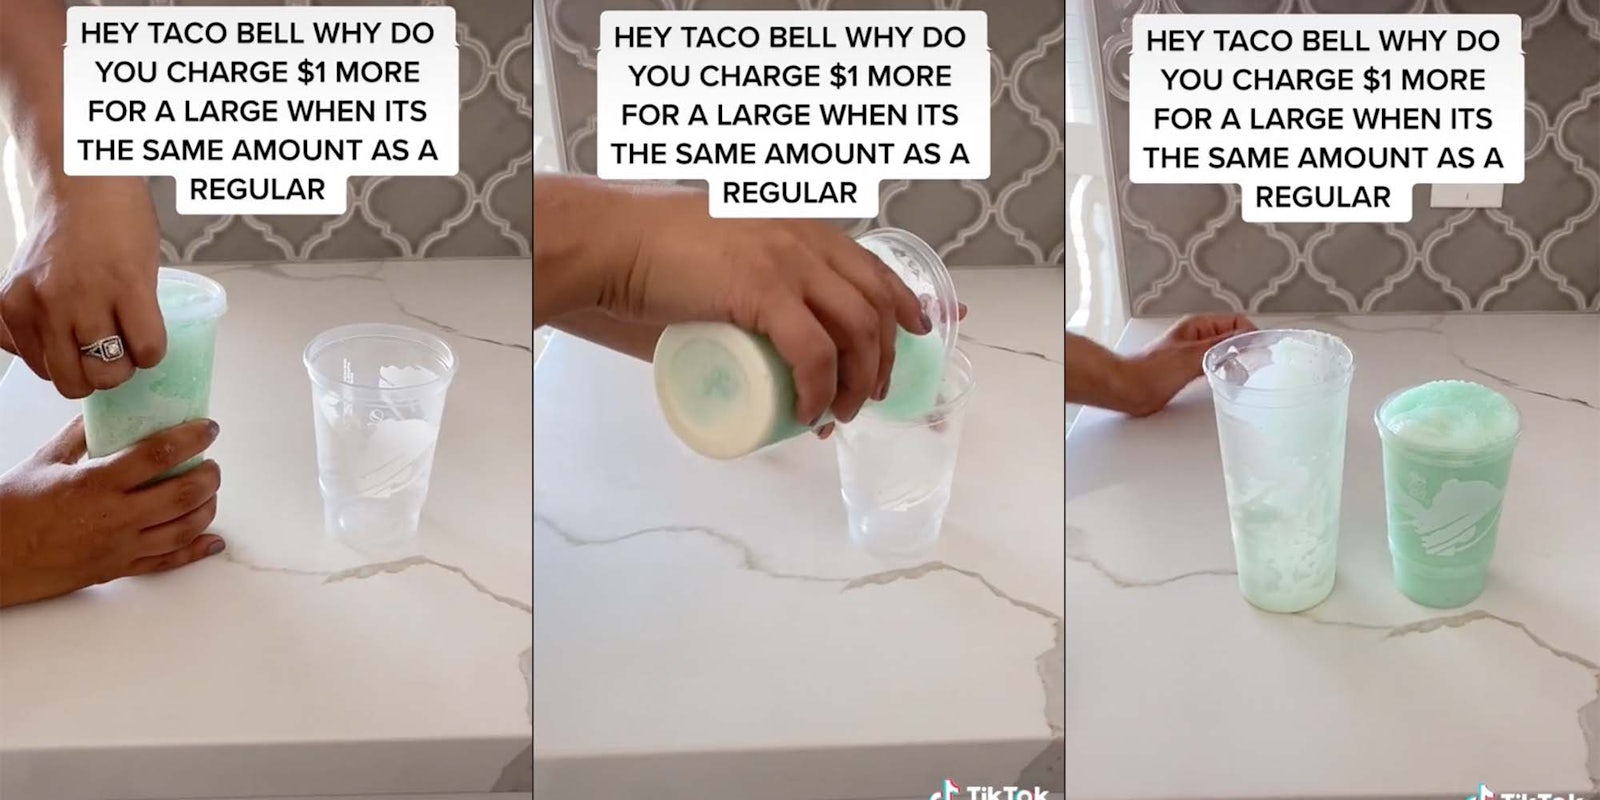 A TikTok video shows that the volumes of large and regular sized cups at Taco Bell are similar.